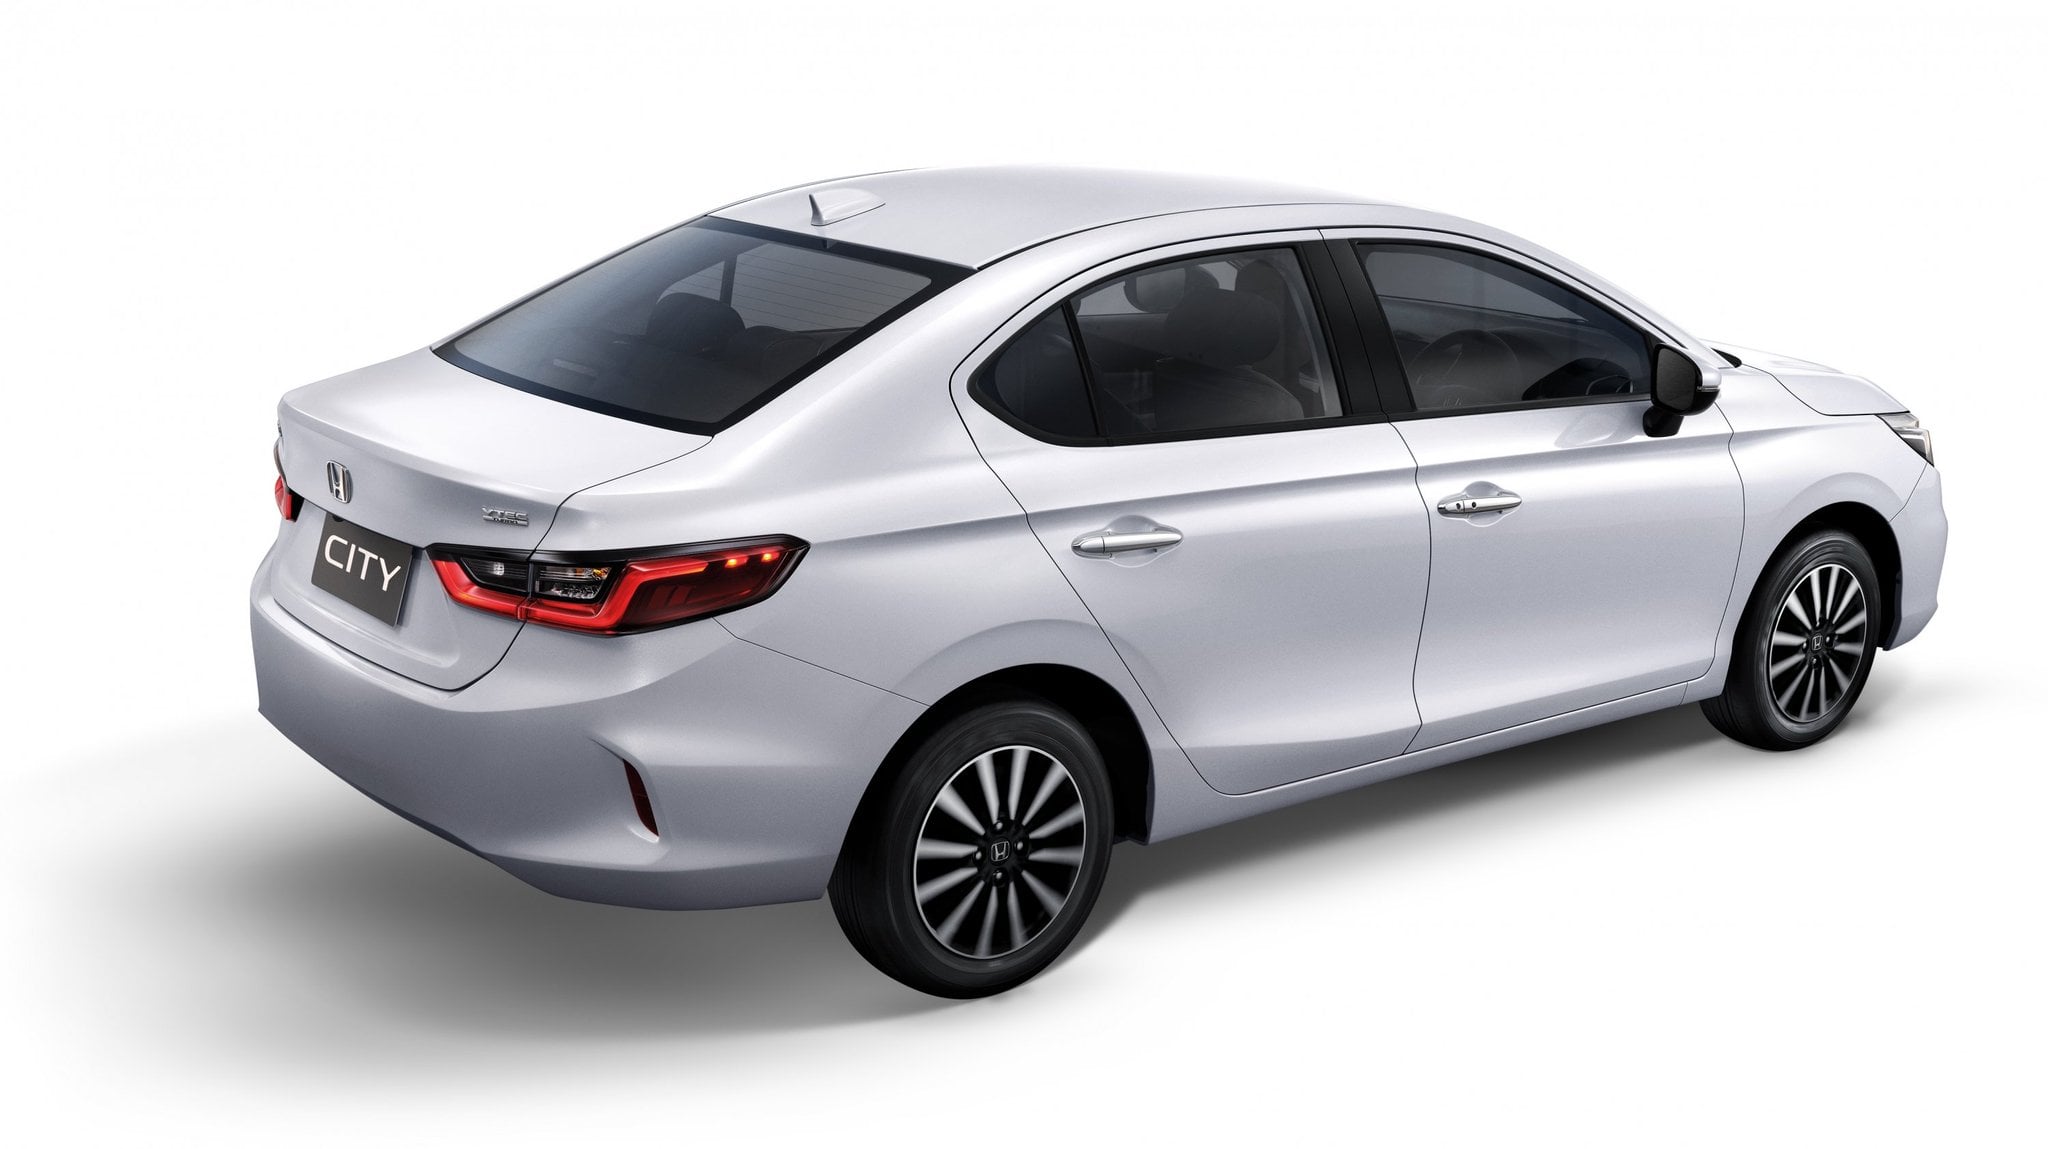 2020 Honda City Might Come Only In Two Fully Loaded Top End Variants